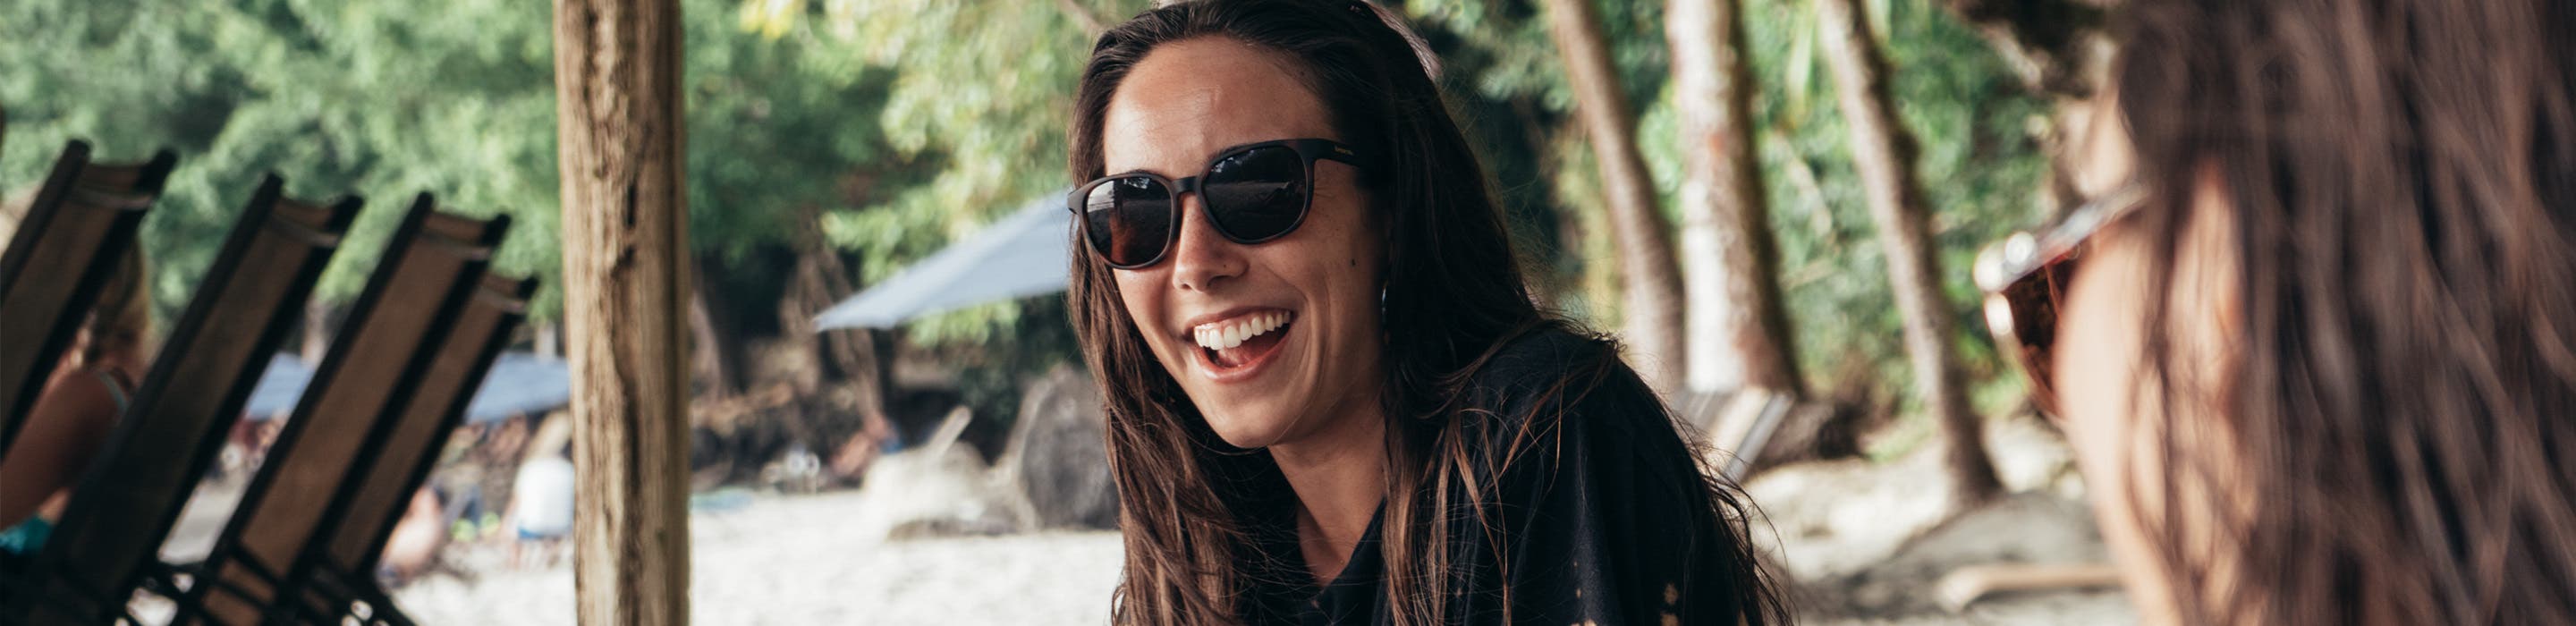 woman smiling and sitting on the beach wearing SportRx women's sunglasses